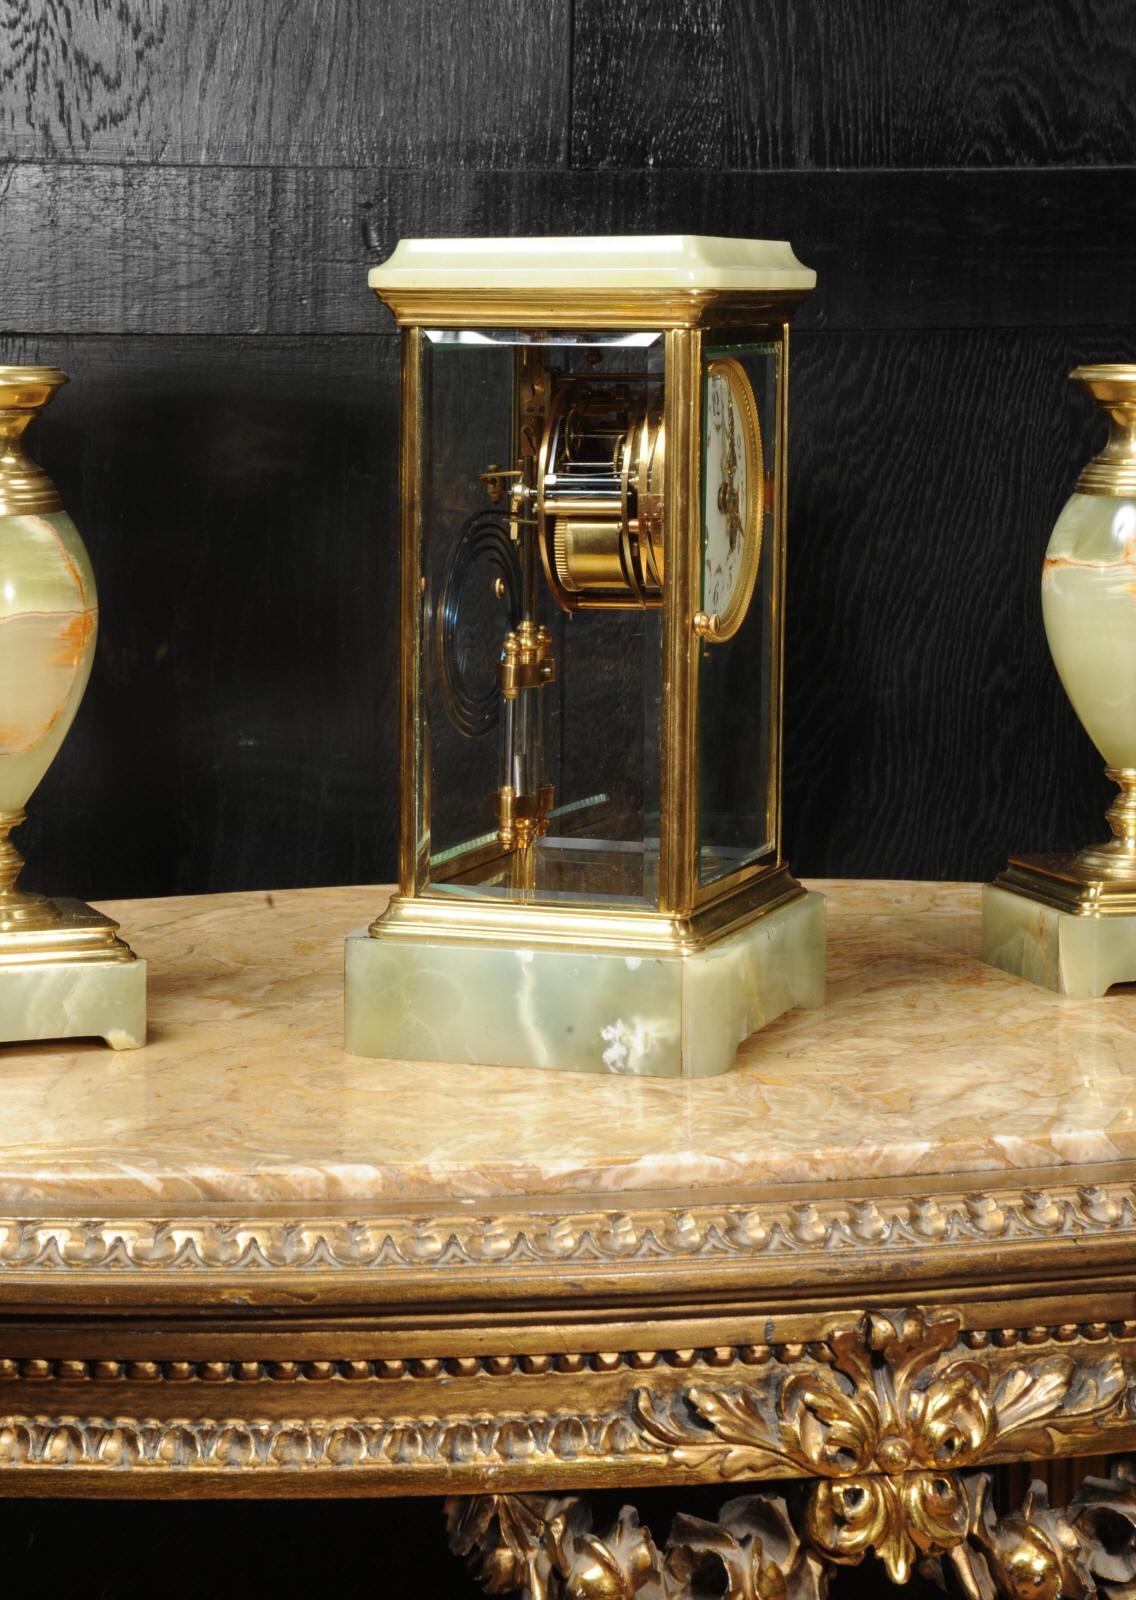 Antique French Four Glass Crystal Regulator Clock Set in Onyx and Ormolu 3